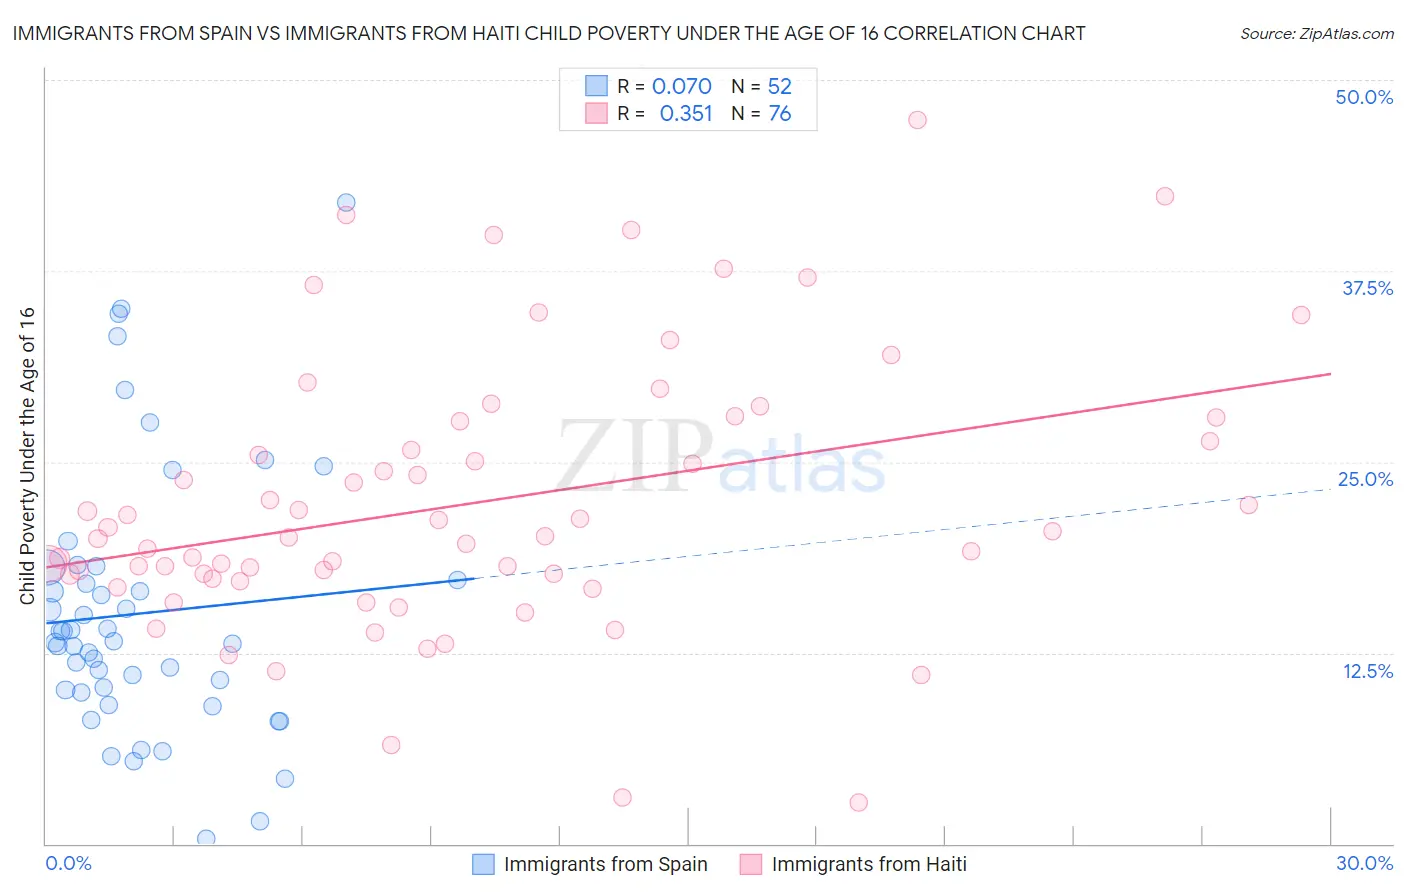 Immigrants from Spain vs Immigrants from Haiti Child Poverty Under the Age of 16